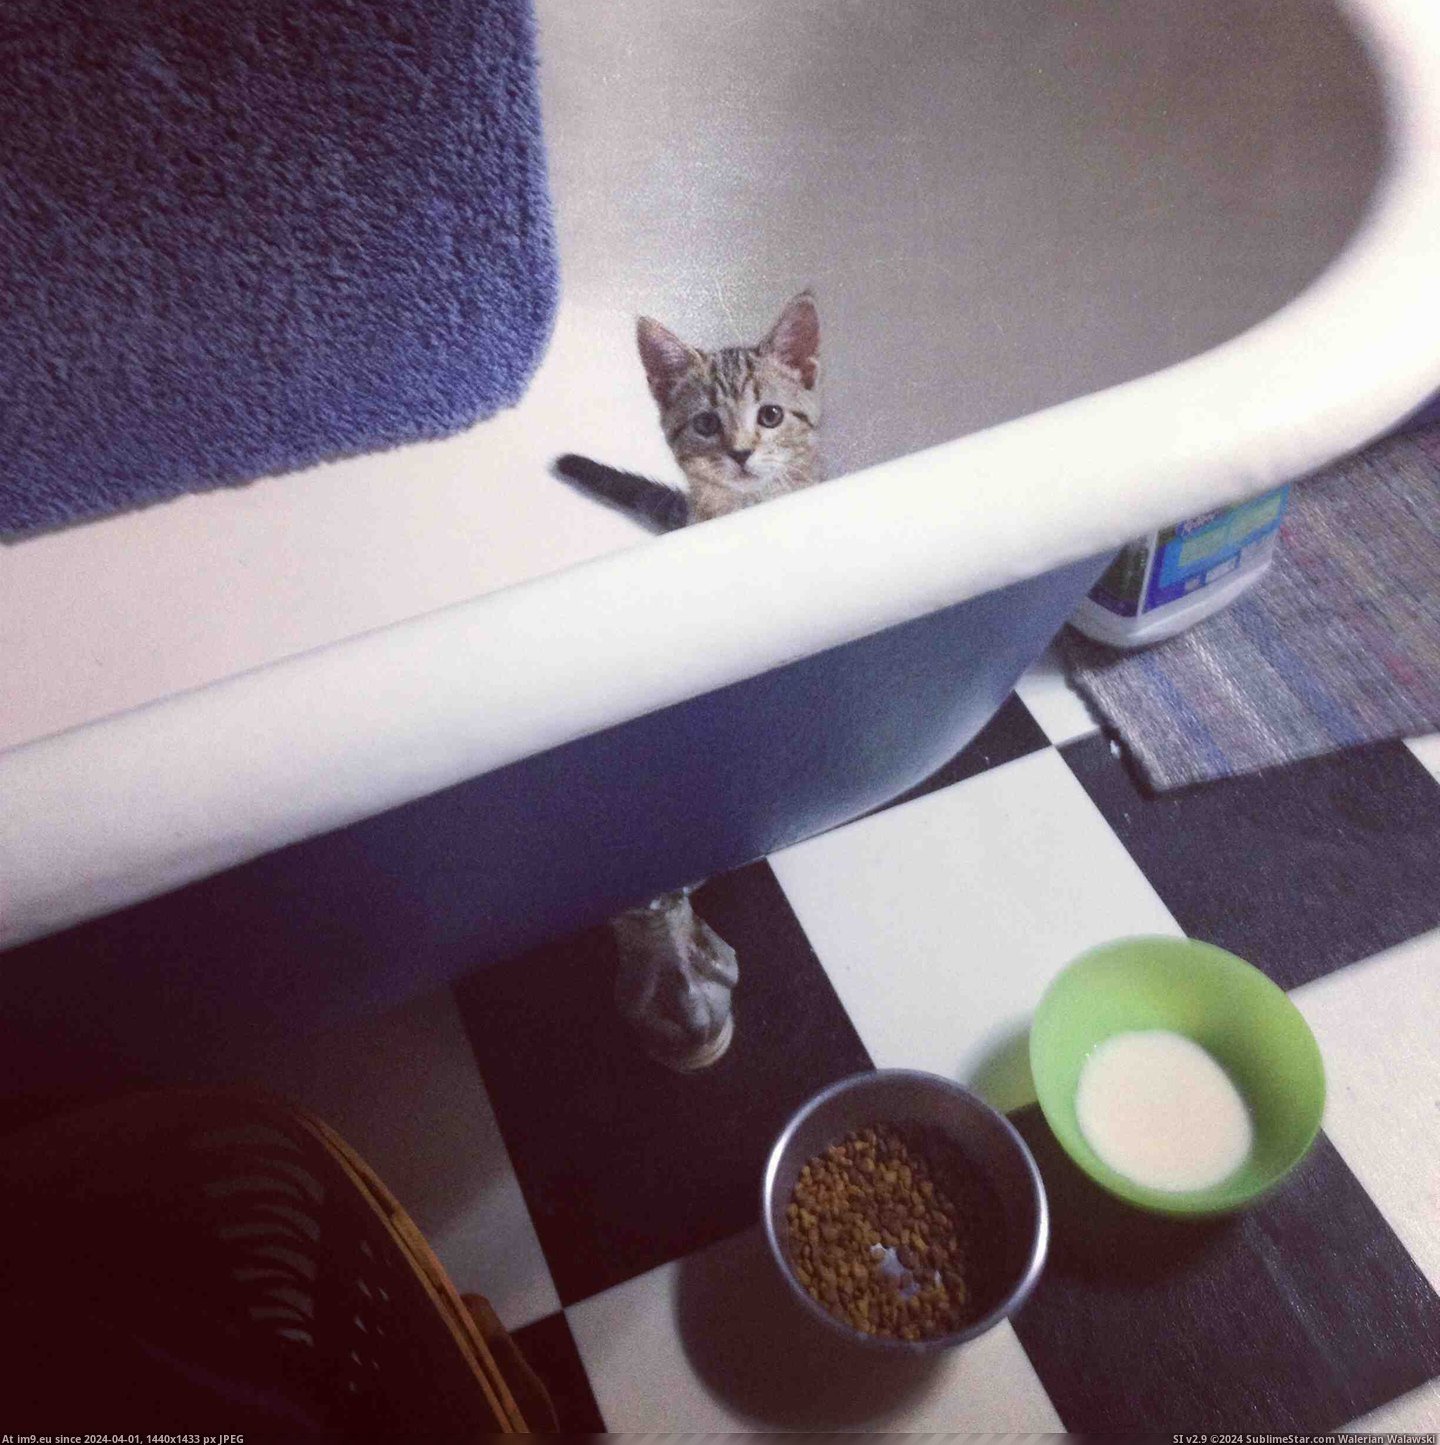 #Cats #Tub #Checking #Out [Cats] Hi! Just checking out the tub! Pic. (Изображение из альбом My r/CATS favs))